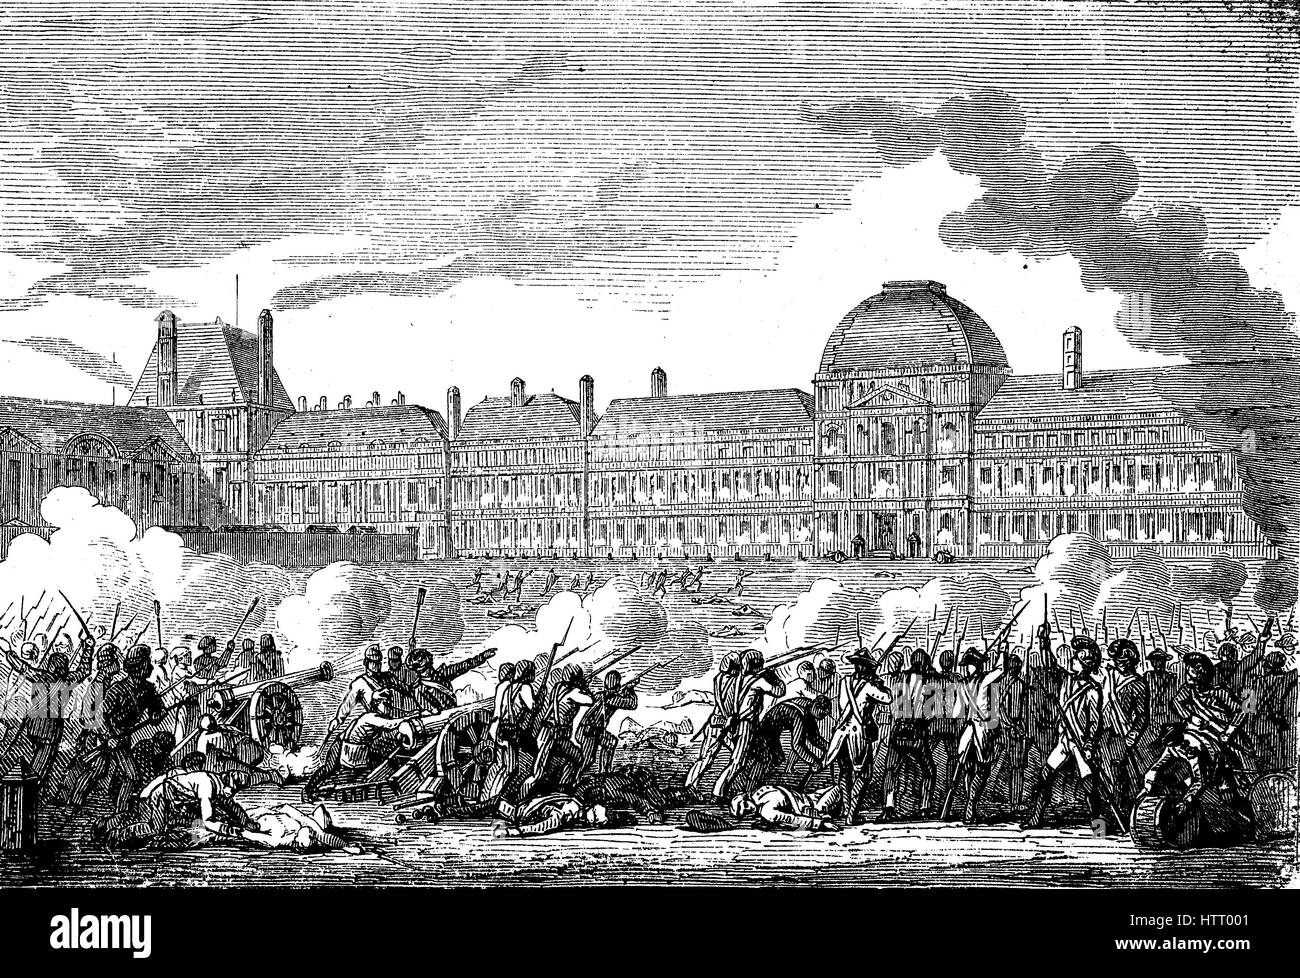 The Insurrection of 10 August 1792 was one of the defining events in the history of the French Revolution. The storming of the Tuileries Palace by the National Guard of the insurrectional Paris Commune and revolutionary from Marseilles and Brittany resulted in the fall of the French monarchy, reproduction of a woodcut from the year 1880, digital improved Stock Photo